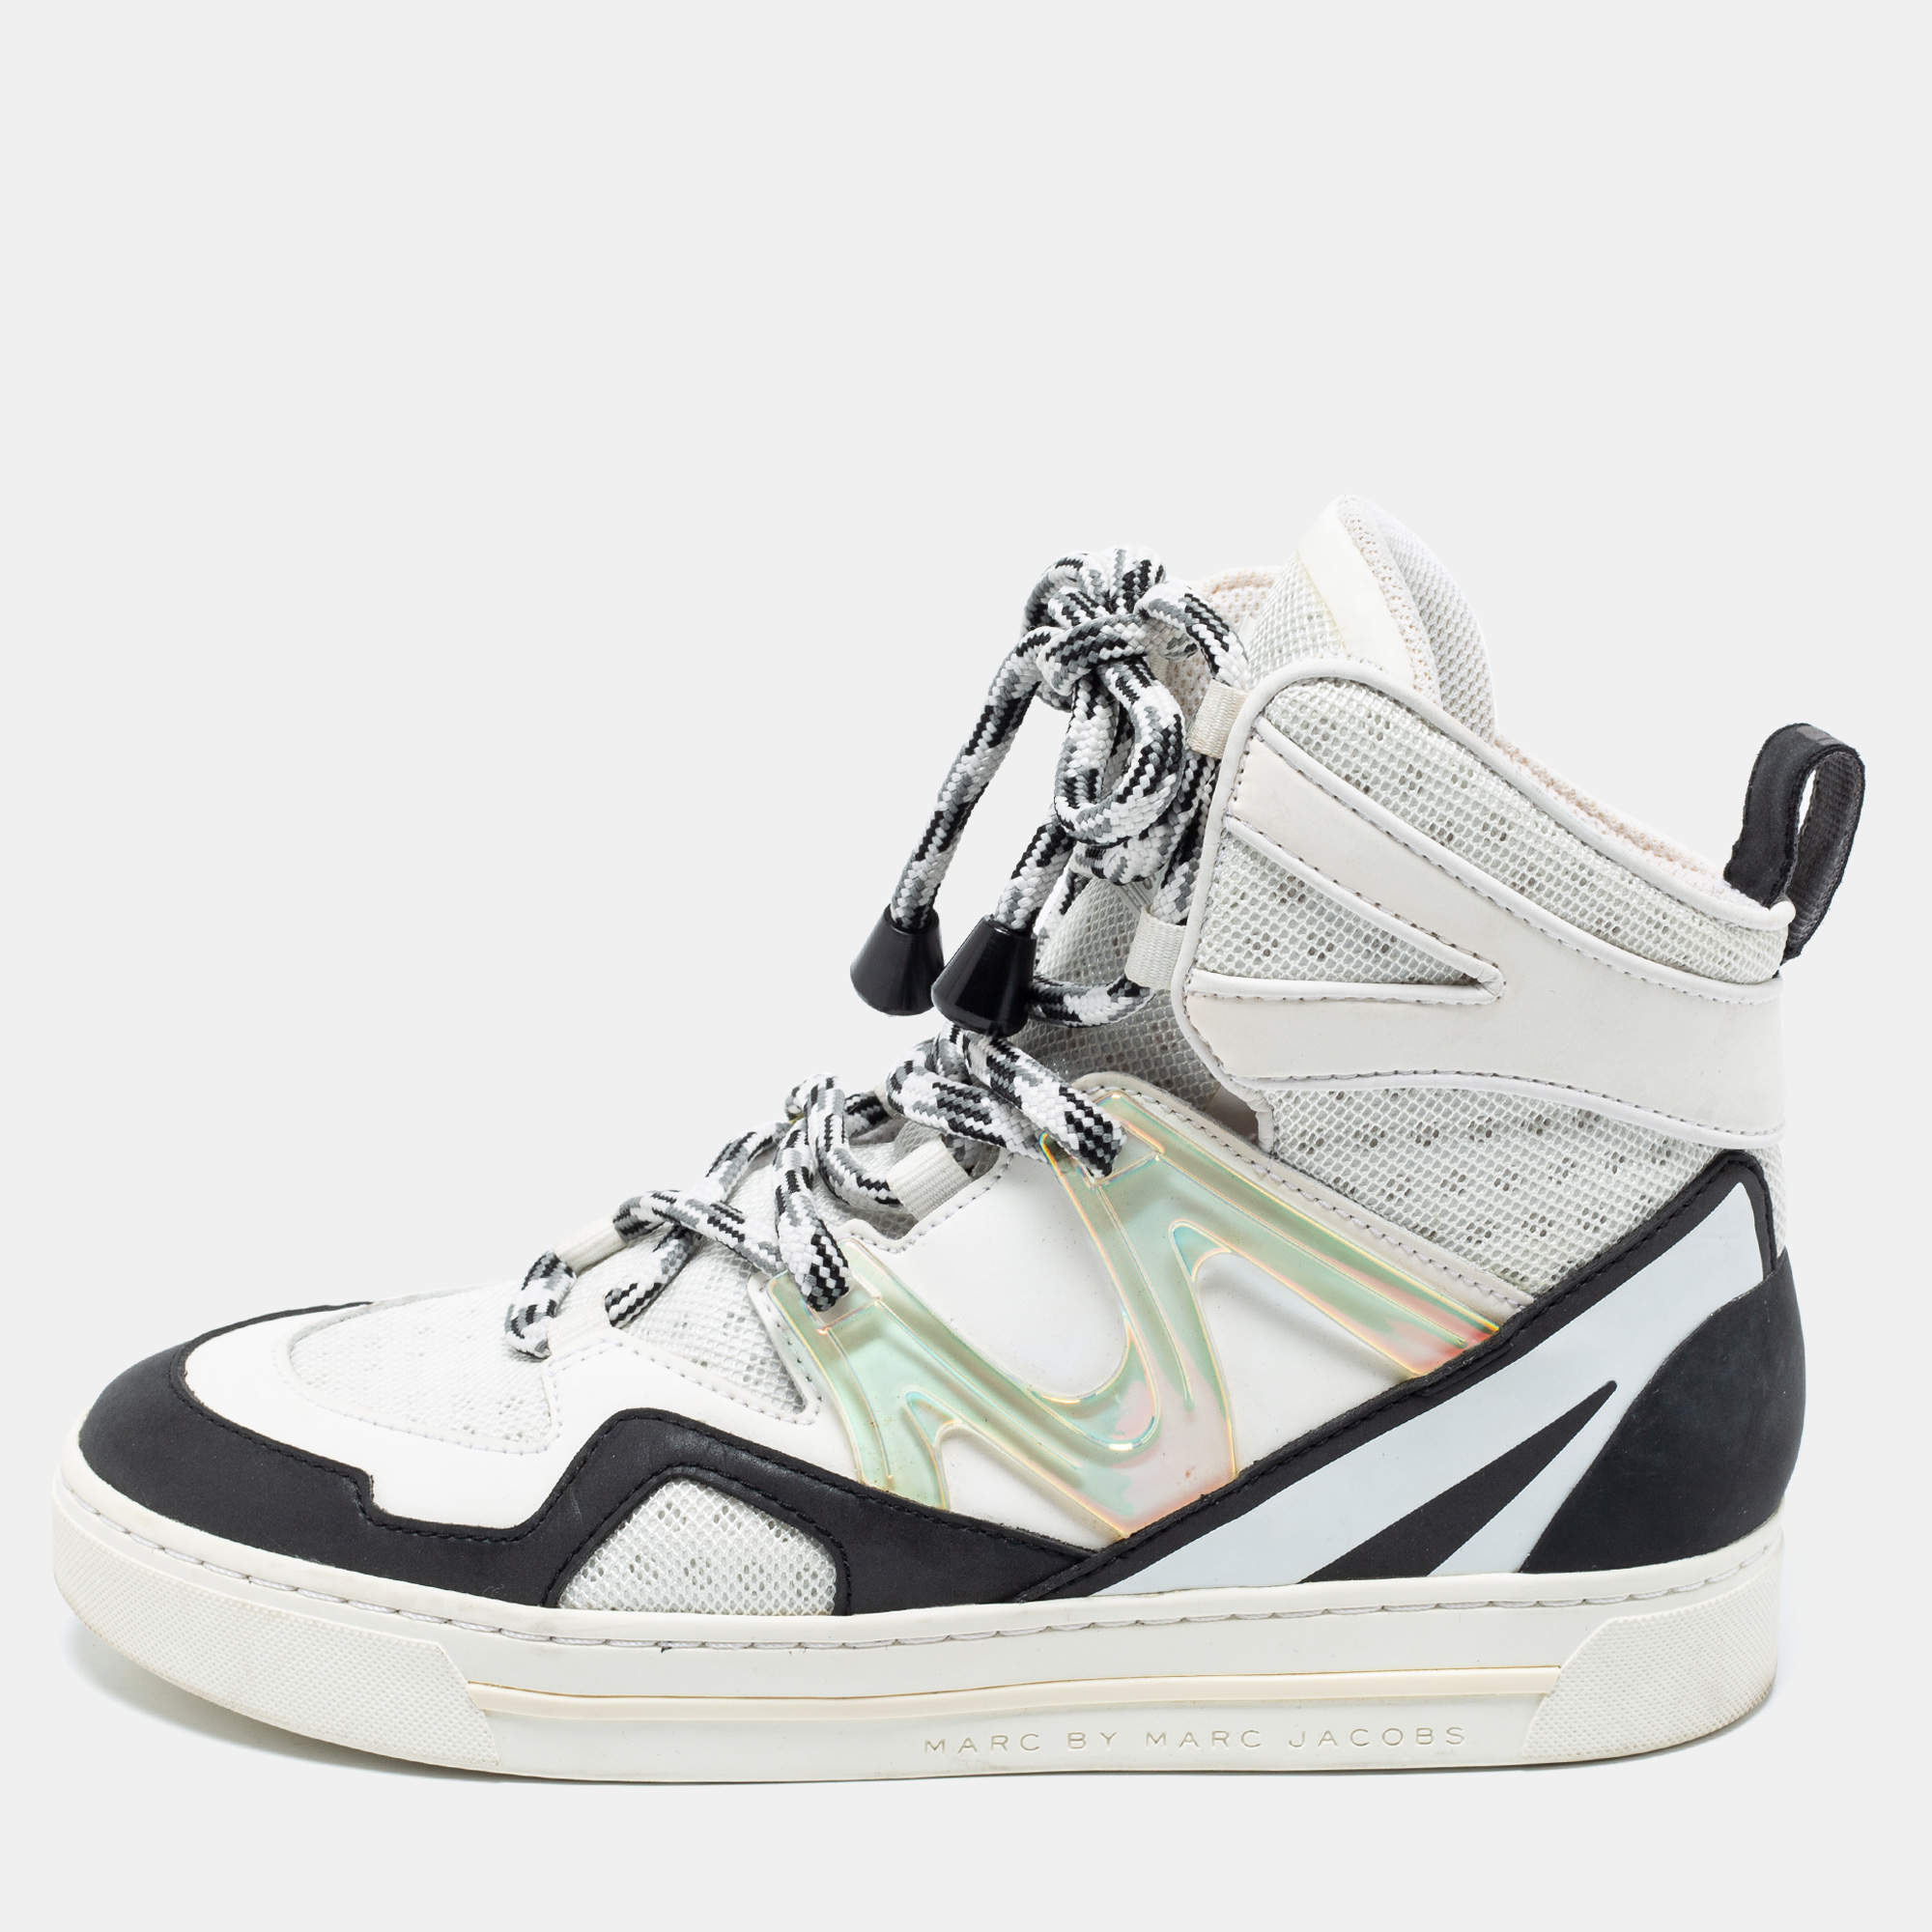 lammelse Decrement solopgang Marc by Marc Jacobs Multicolor Leather And Mesh High Top Sneakers Size 36  Marc by Marc Jacobs | TLC